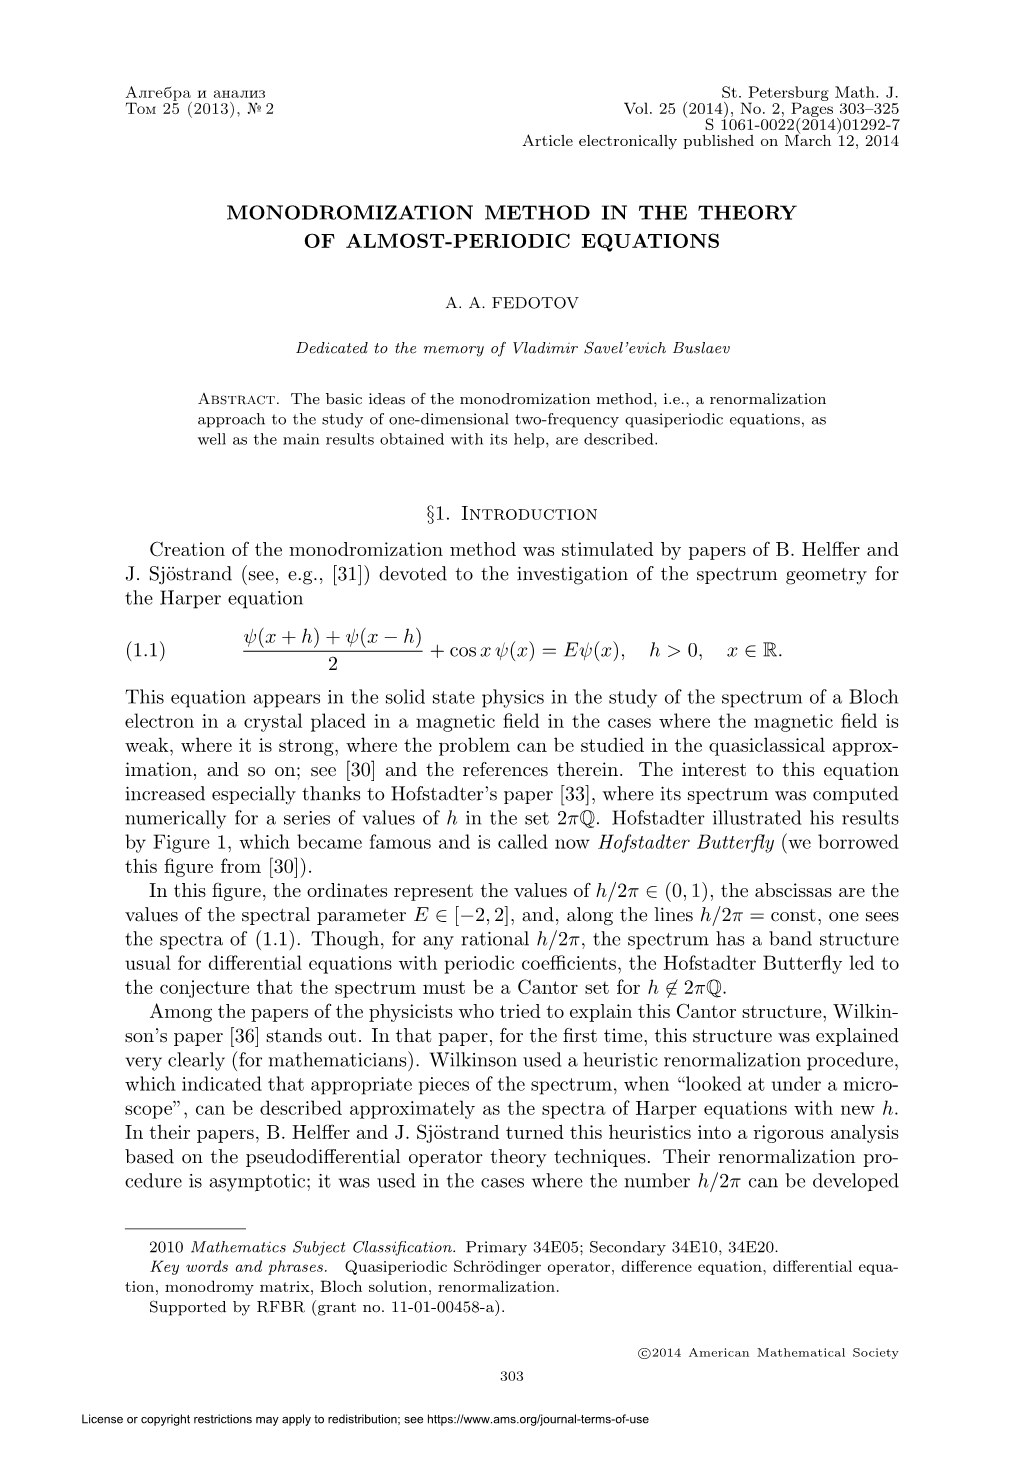 Monodromization Method in the Theory of Almost-Periodic Equations